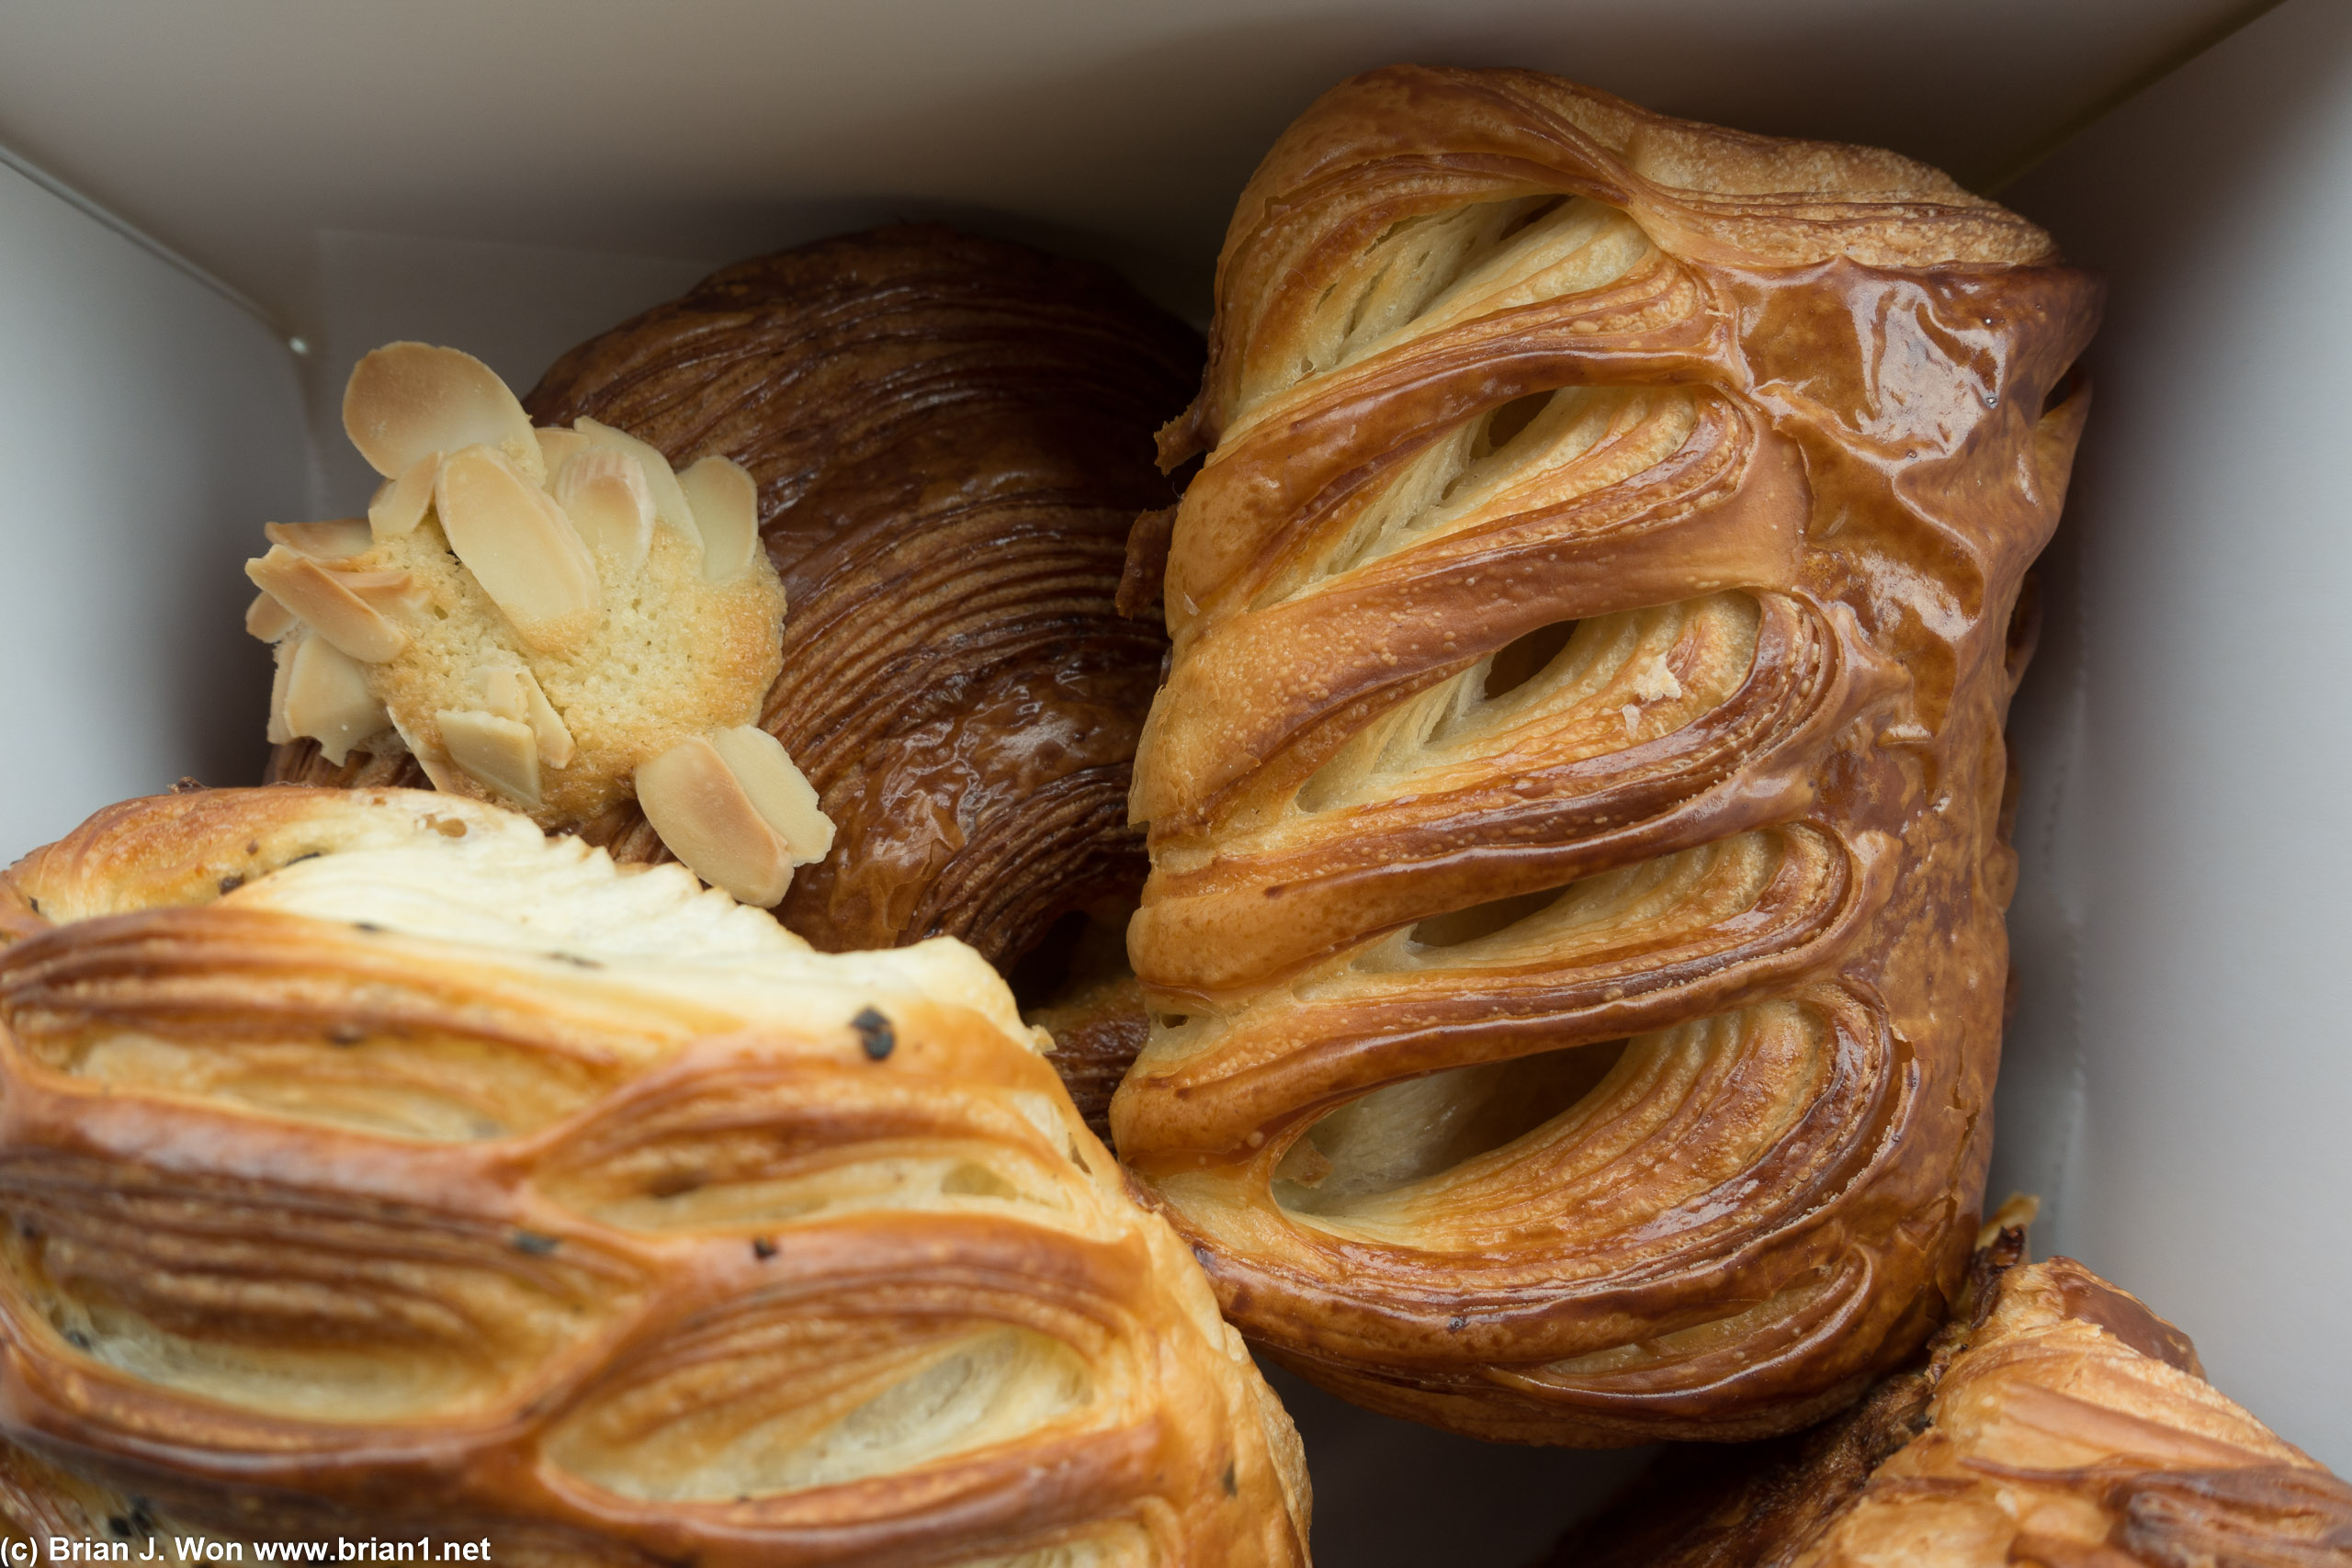 Close-up of the almond (bottom) and pain au chocolat (top).